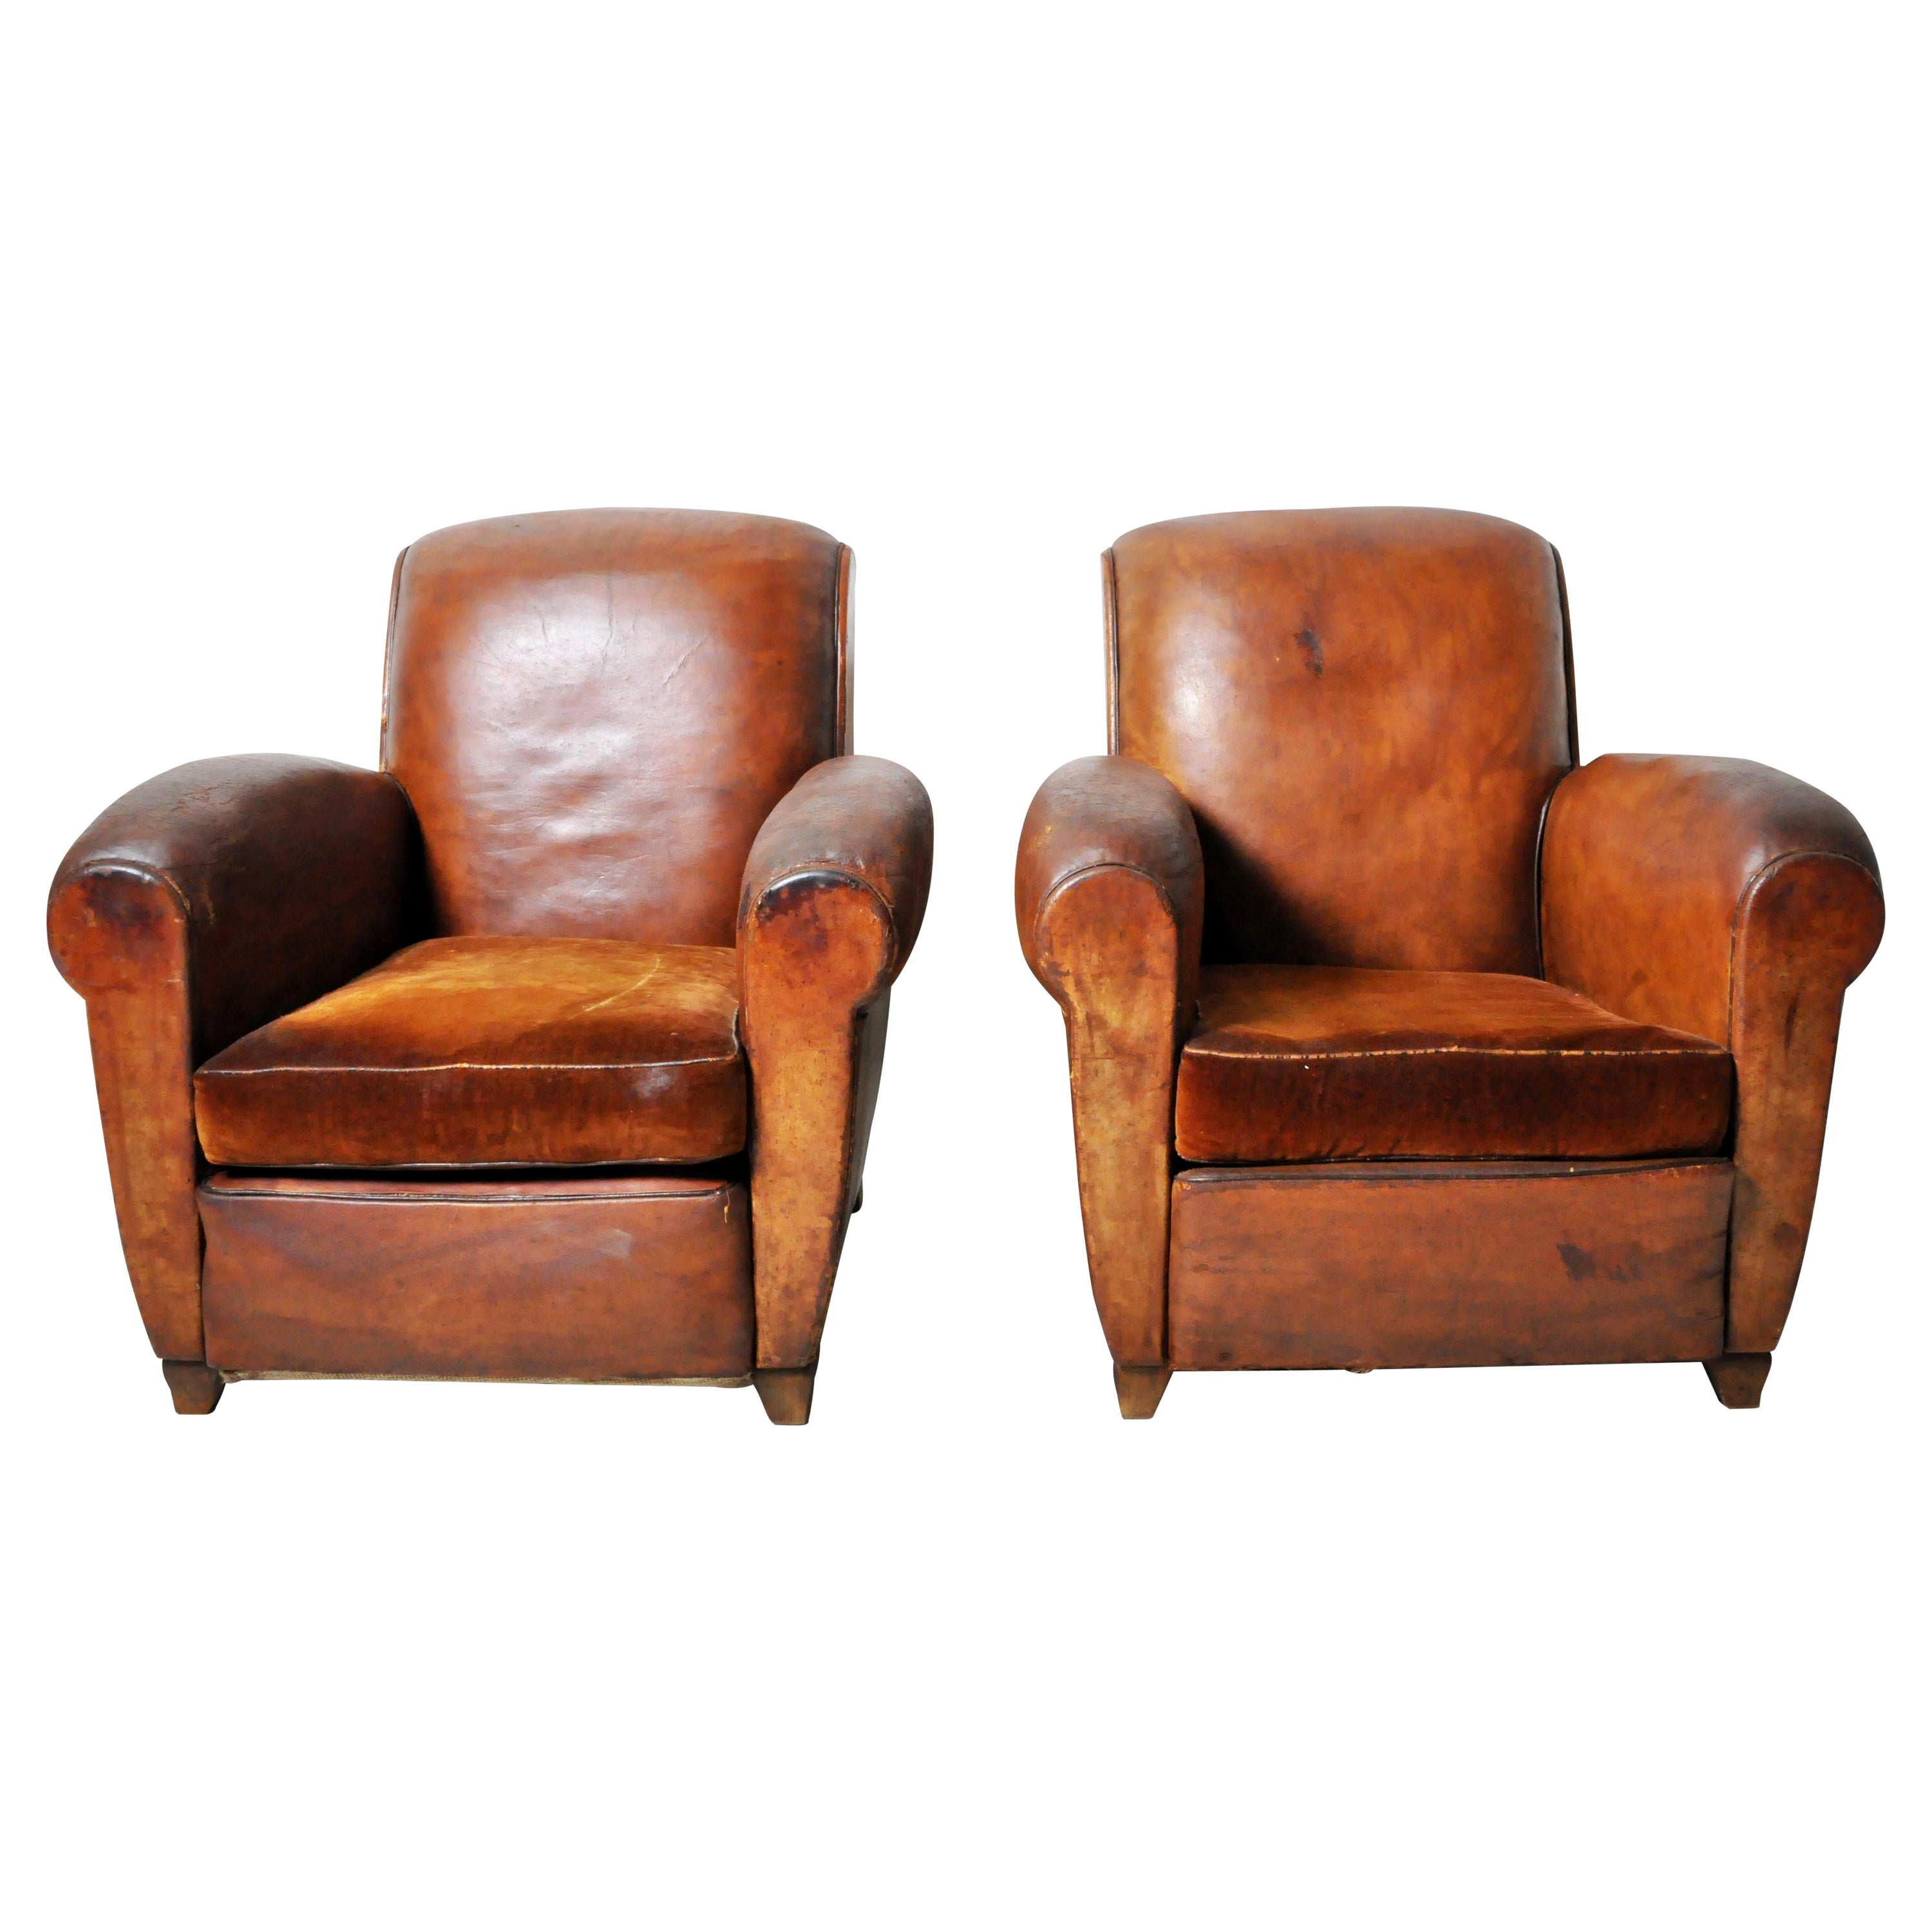 Pair of Art Deco Leather Club Chairs